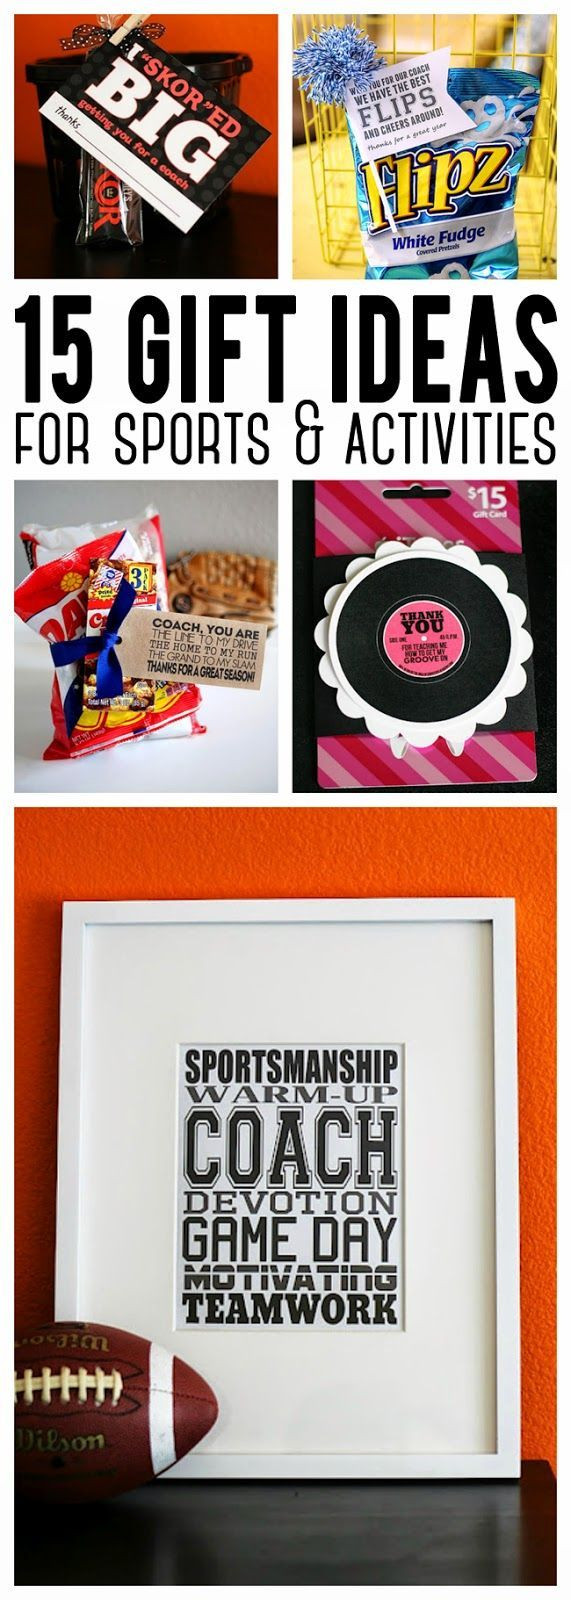 Thank You Gift Ideas For Football Coaches
 17 Best images about Baseball Coach Gifts on Pinterest